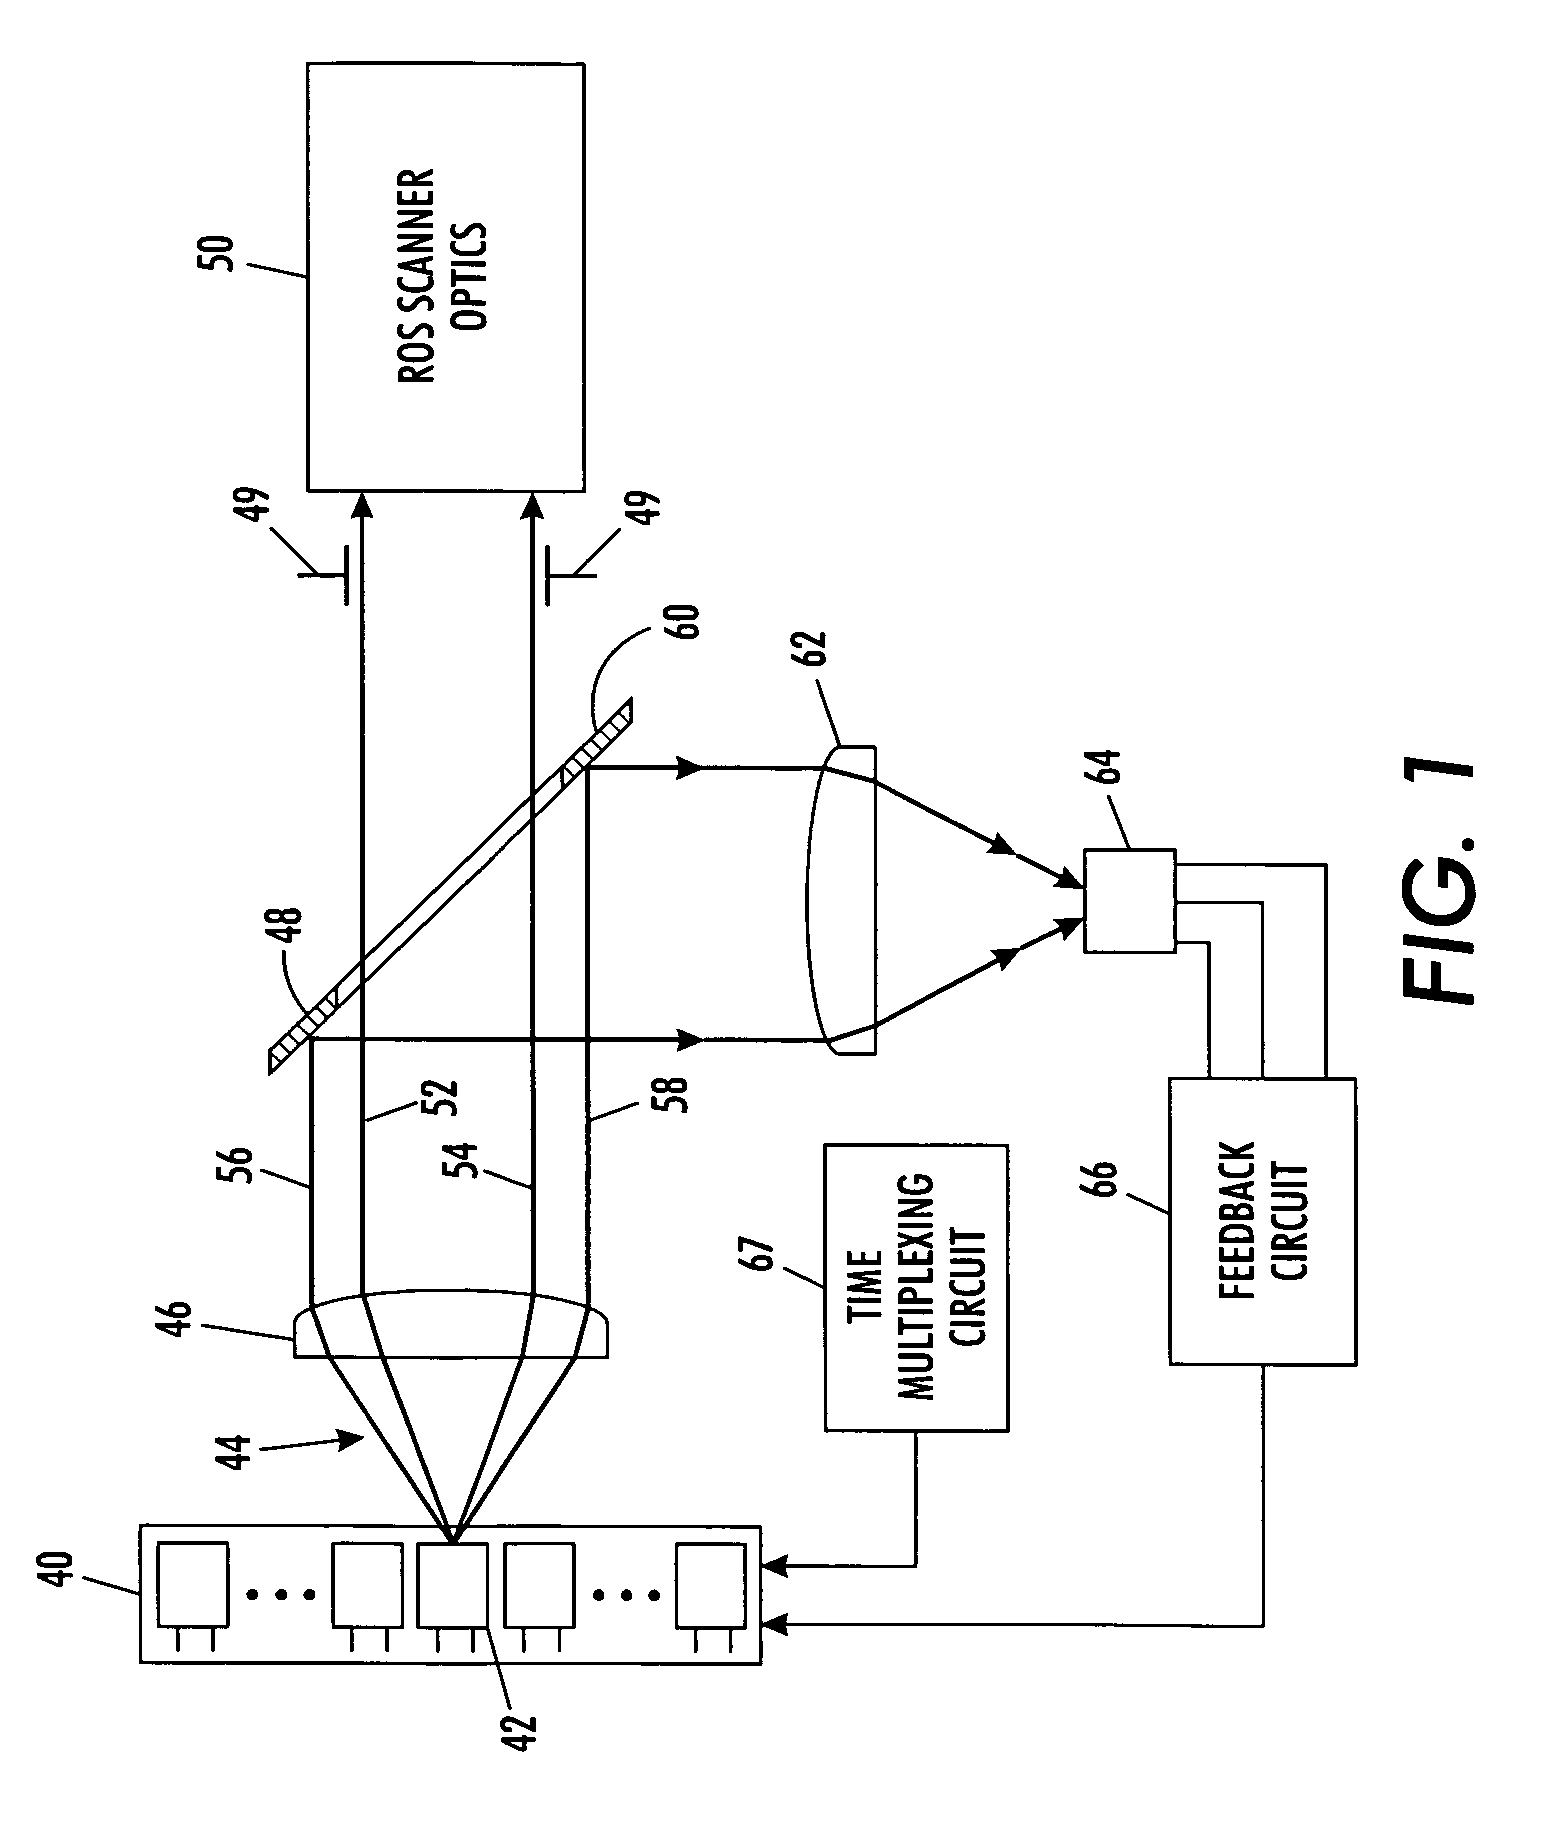 Method and apparatus for monitoring and controlling laser intensity in a ROS scanning system